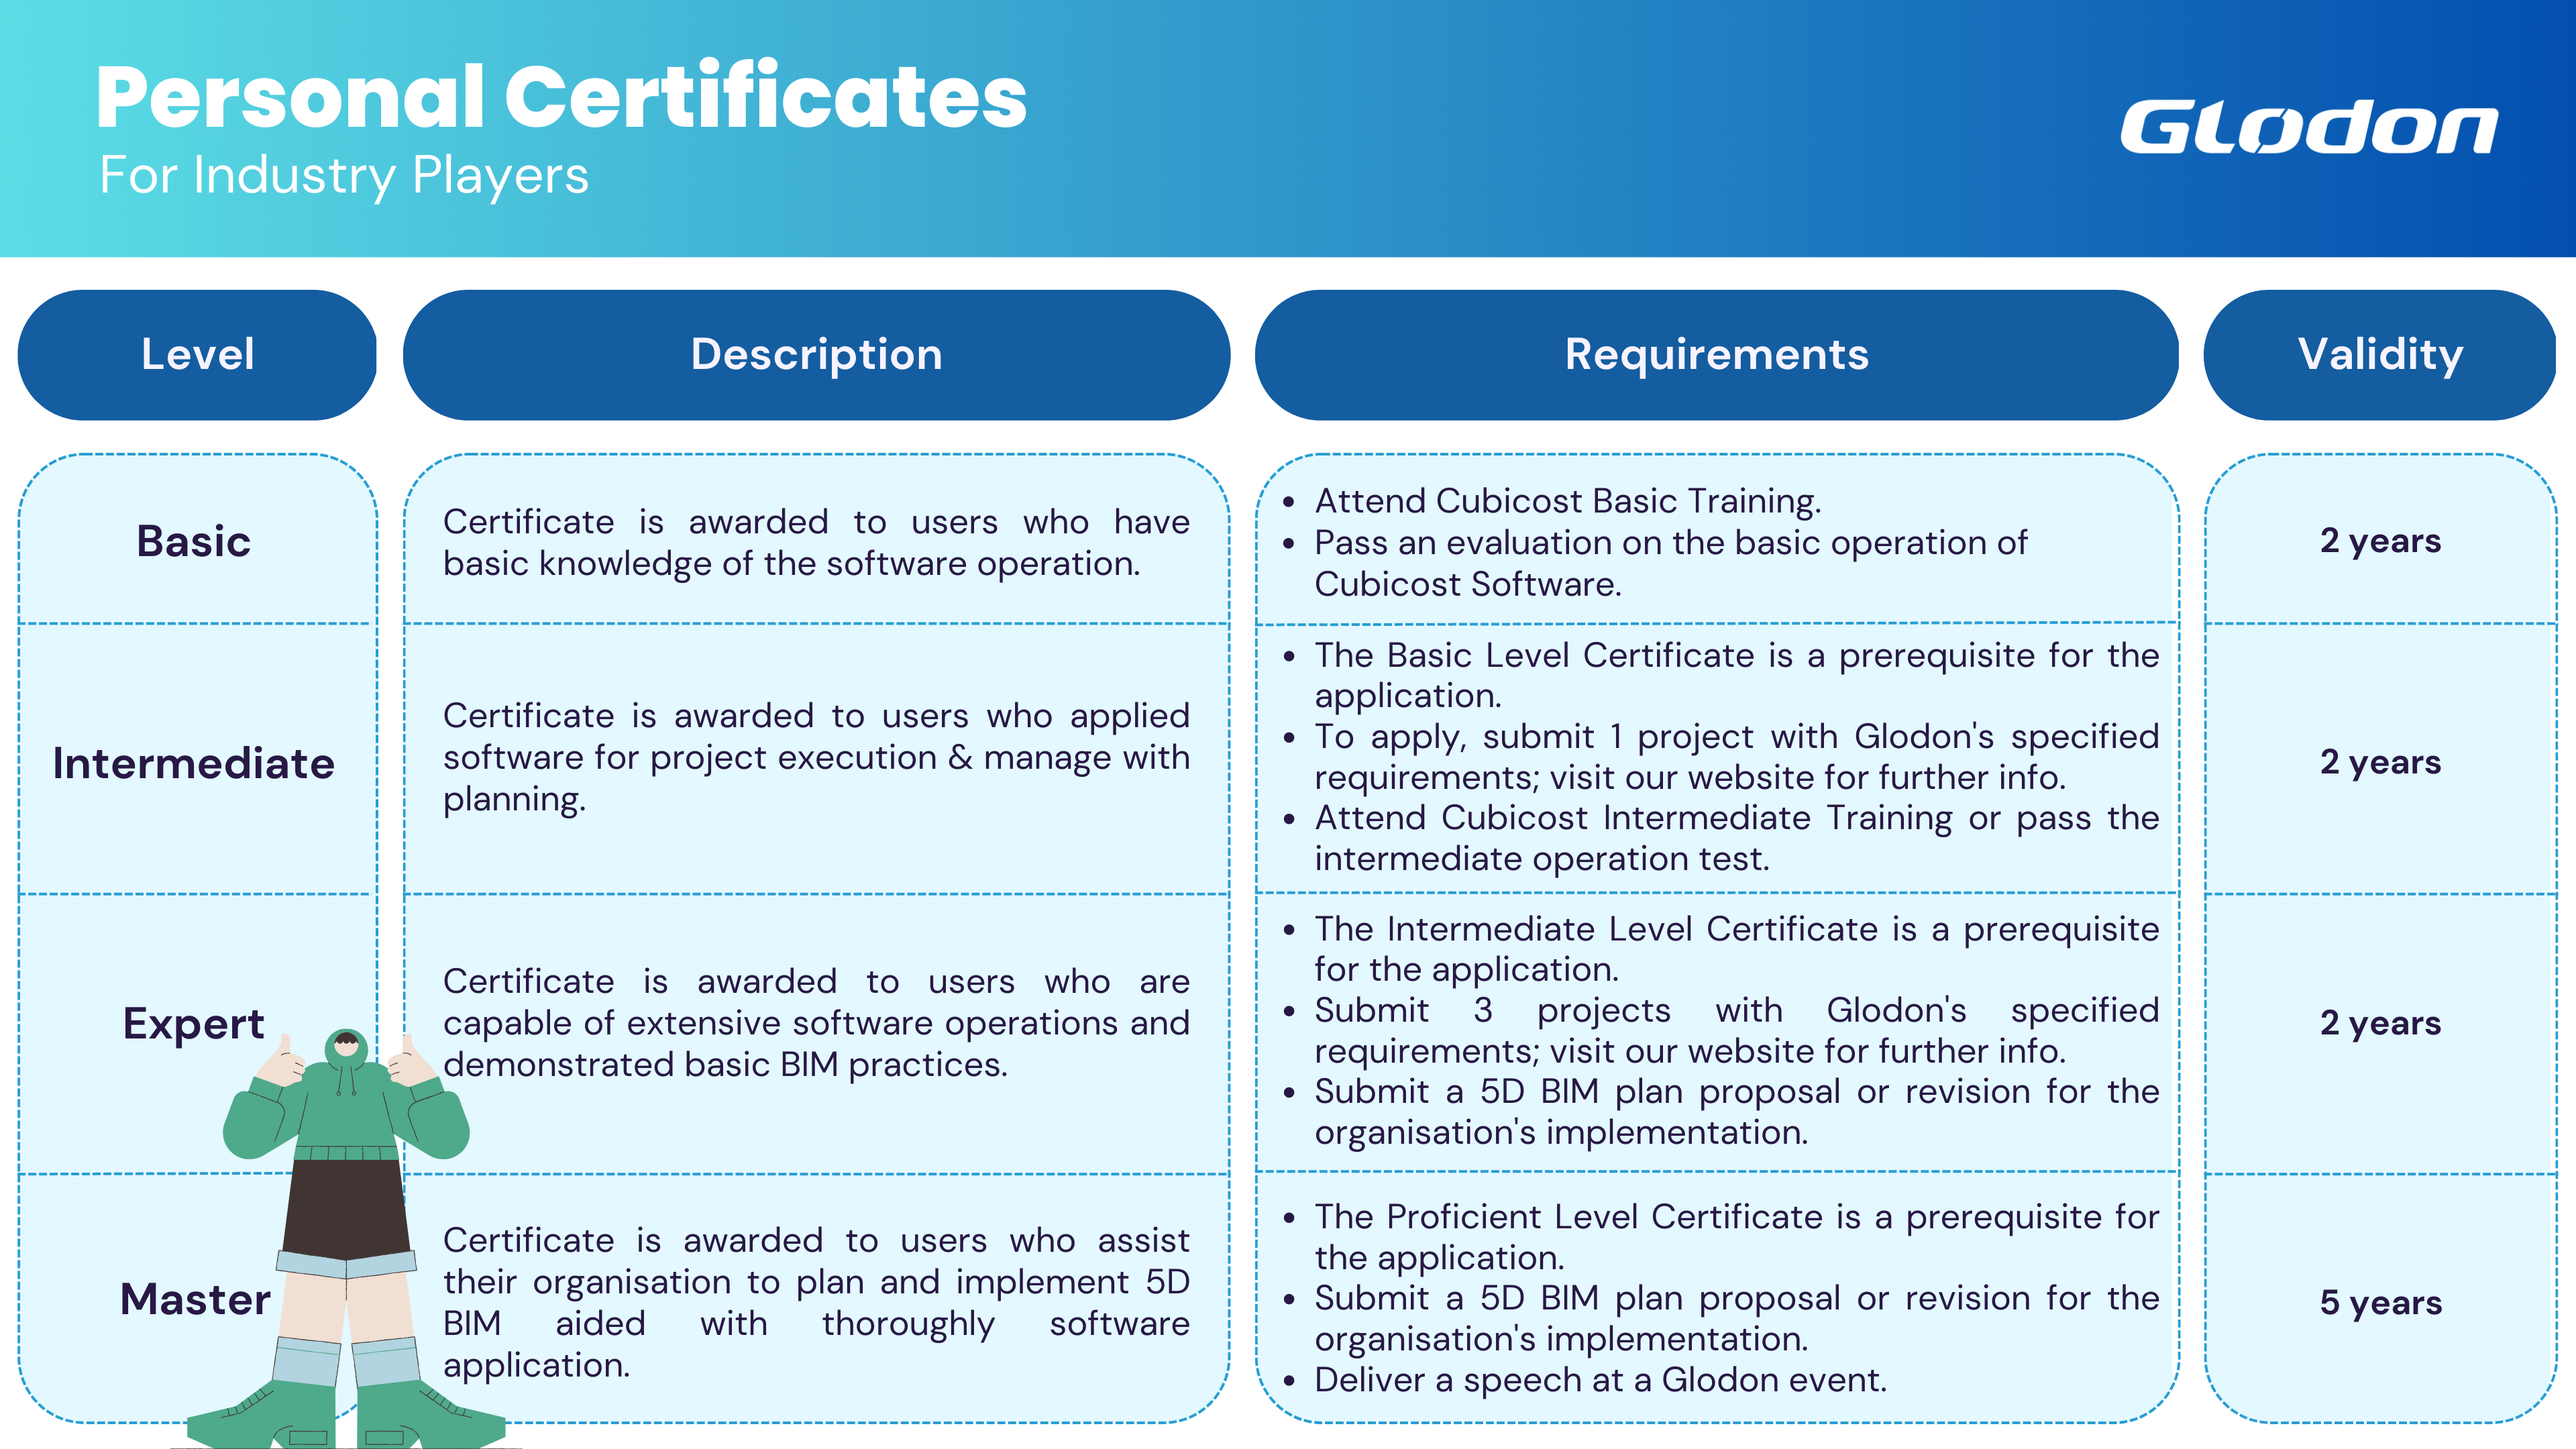 Glodon Certificate for Industrial Professionals